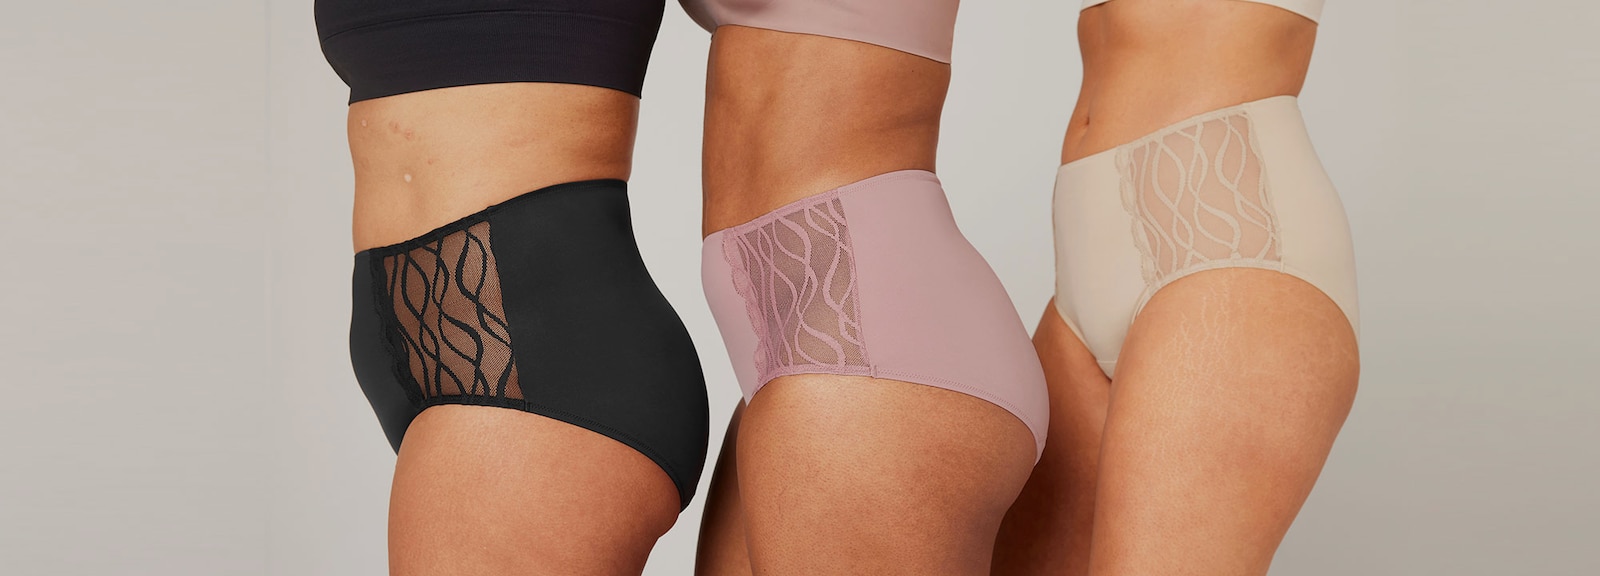 https://tena-images.essity.com/images-c5/378/497378/original/tena-range-colors-washable-incontinence-underwear-banner-overlay.png?w=1600&h=10000&imPolicy=dynamic